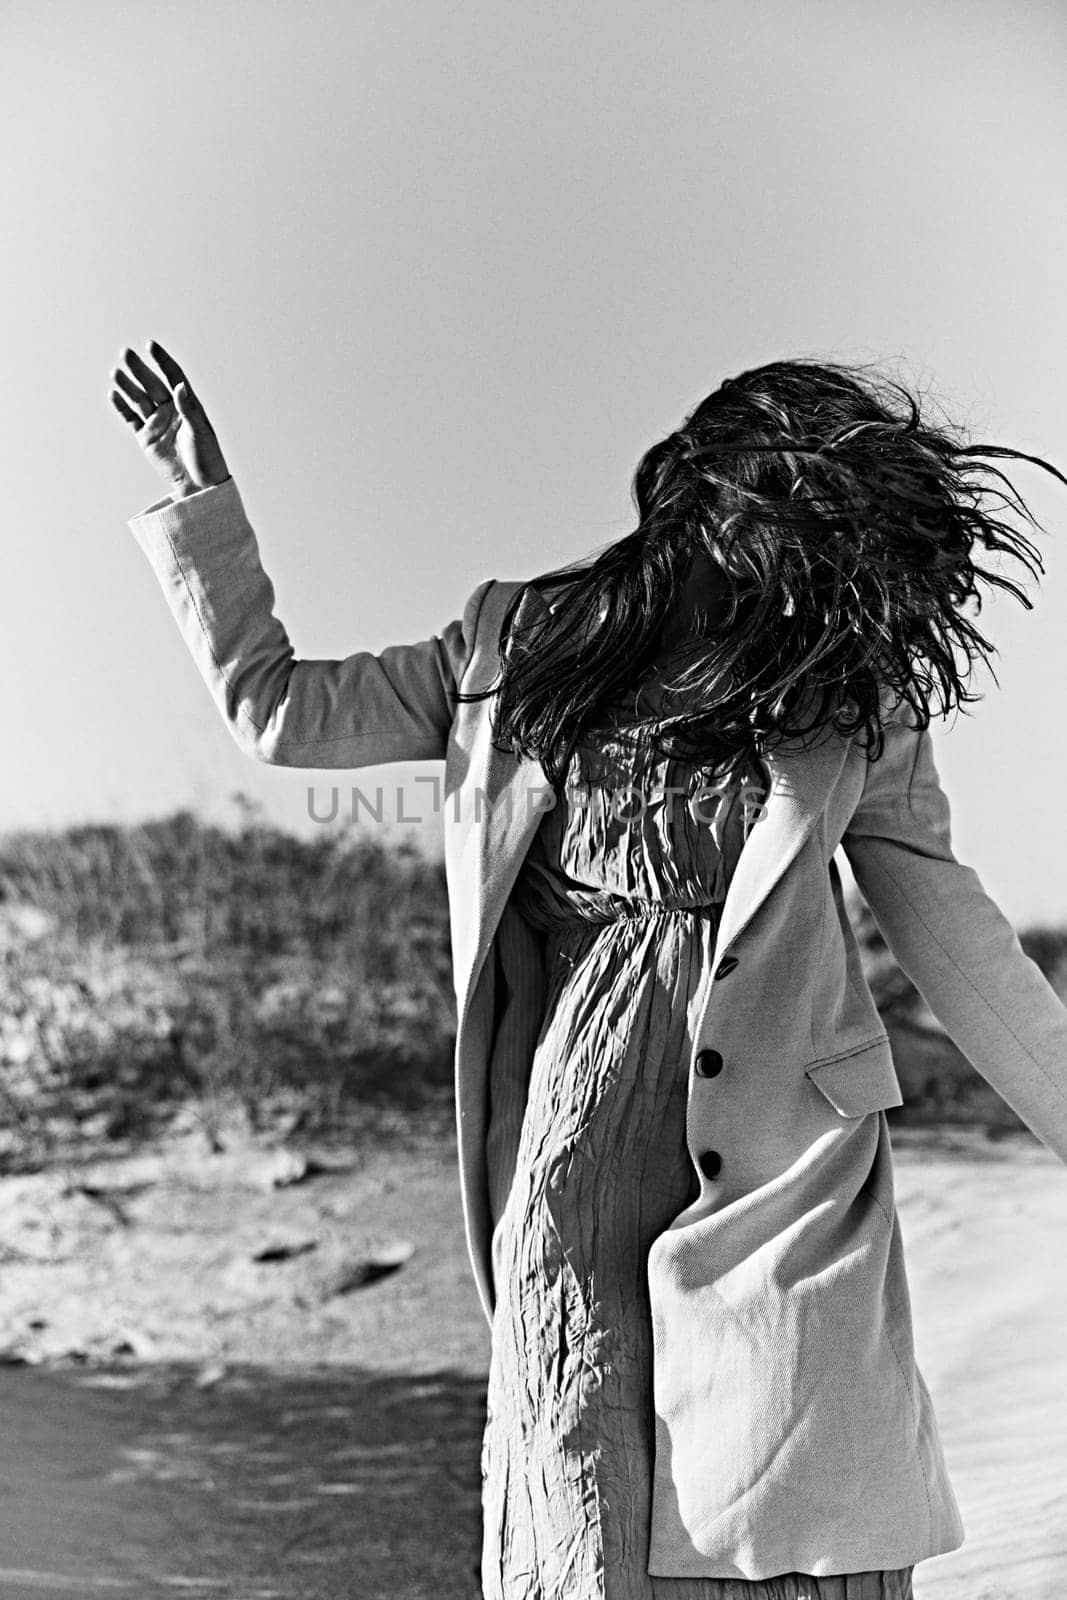 monochrome photo of a twirling woman on the coast in a light-colored jacket by Vichizh